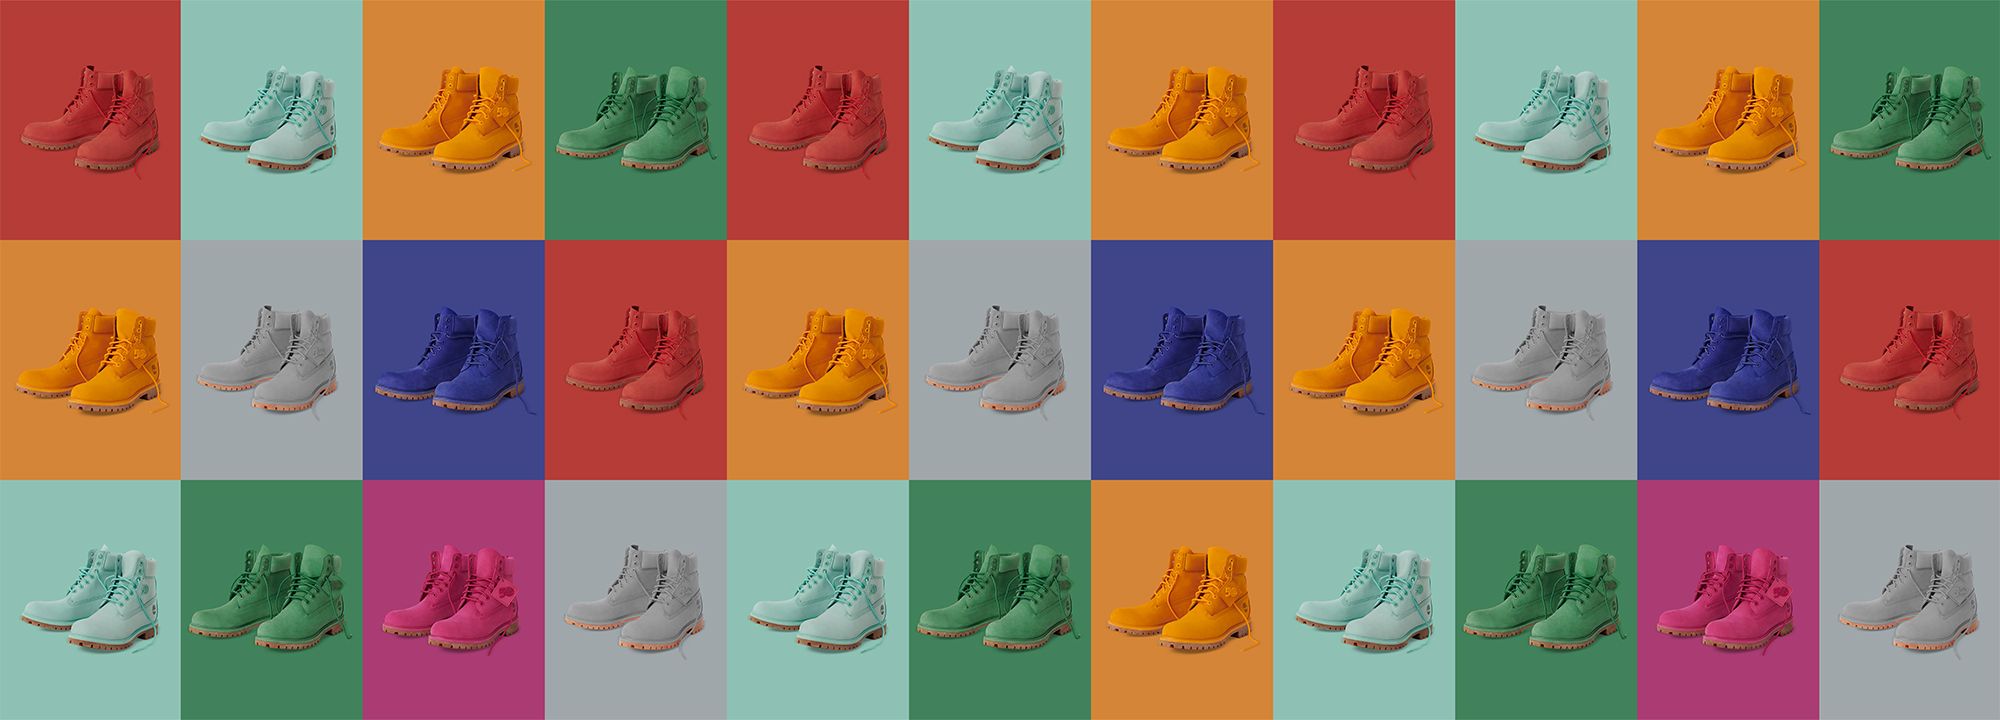 11 by 3 grid showing with each square one of the timberland 50th anniversary colors with corresponding colored boots